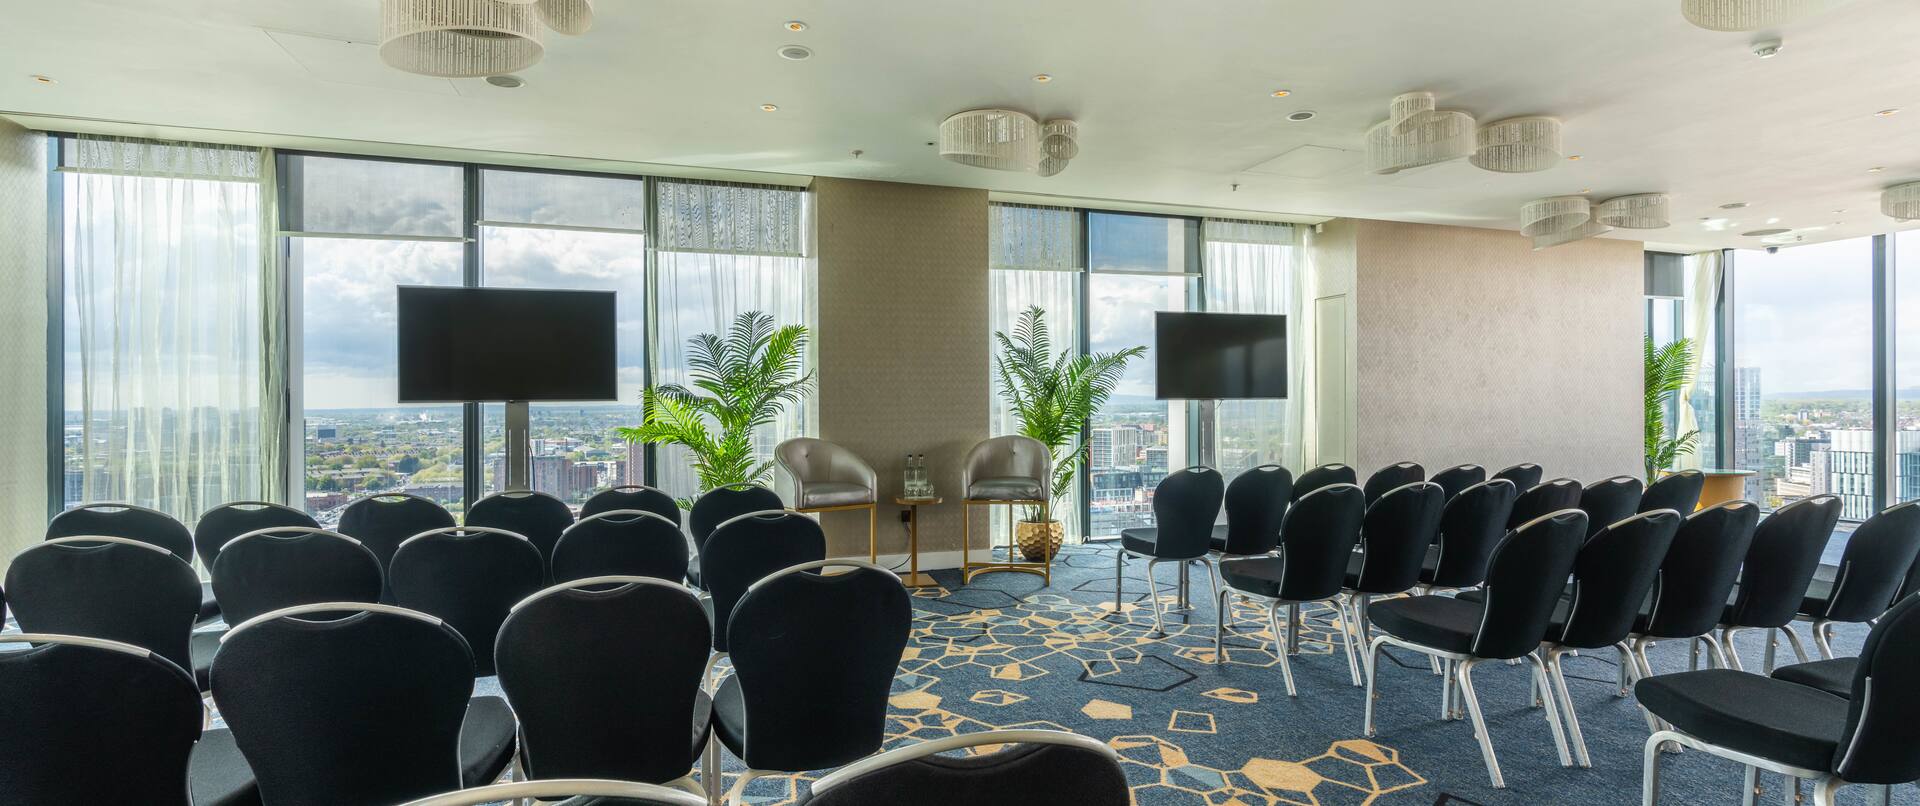 Meeting Room with chairs and view